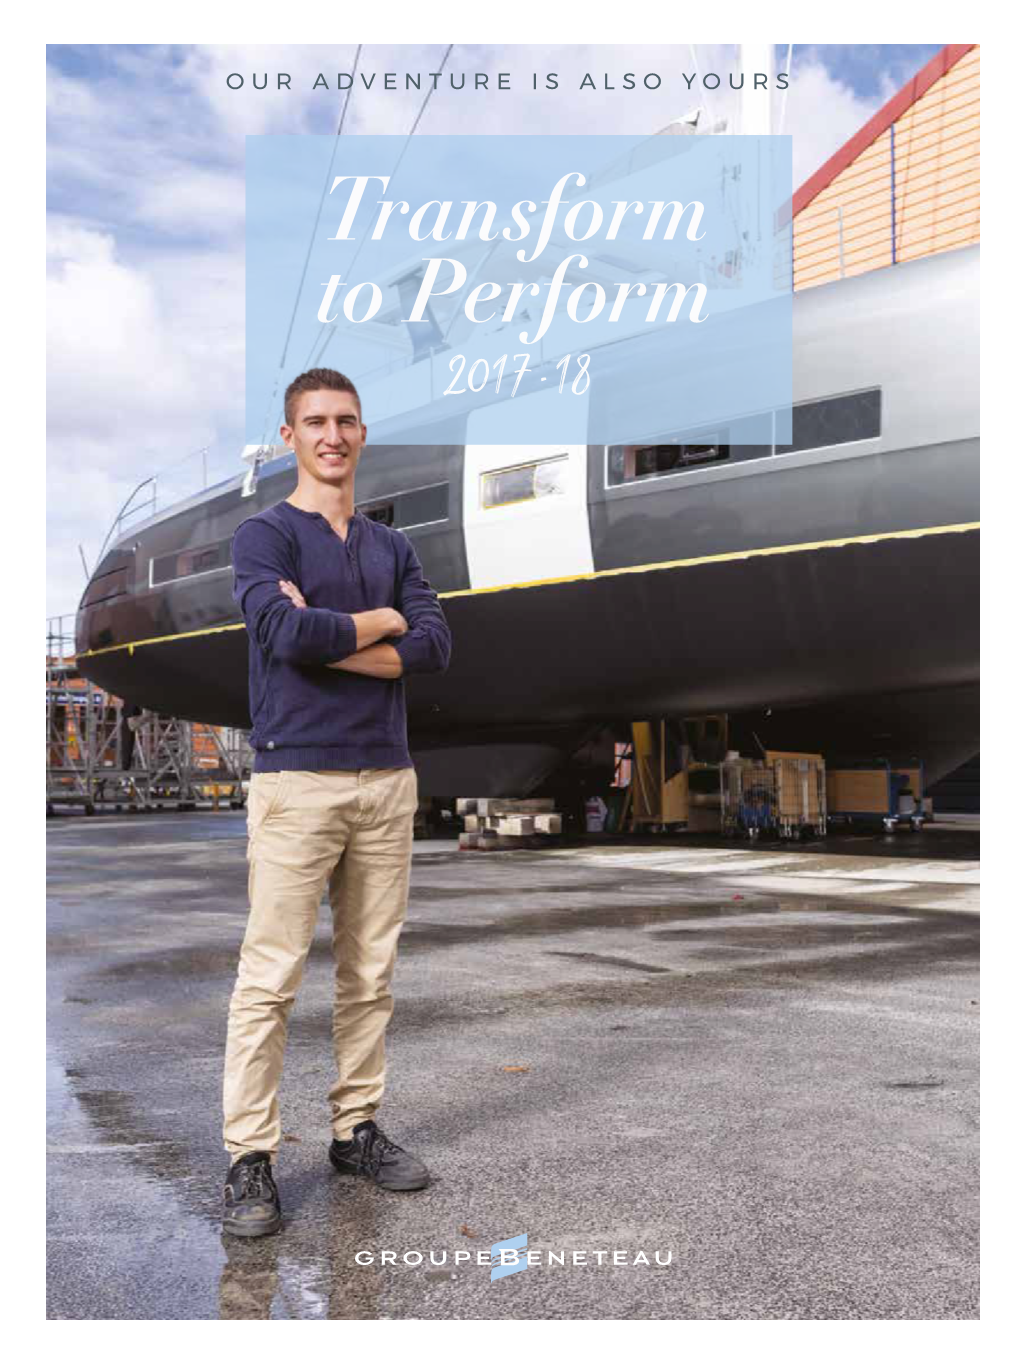 Transform to Perform 2017-20 Deployed in 2017, the Transform to Perform Plan Sets Groupe Beneteau’S Strategic Heading As It Looks Ahead to 2020